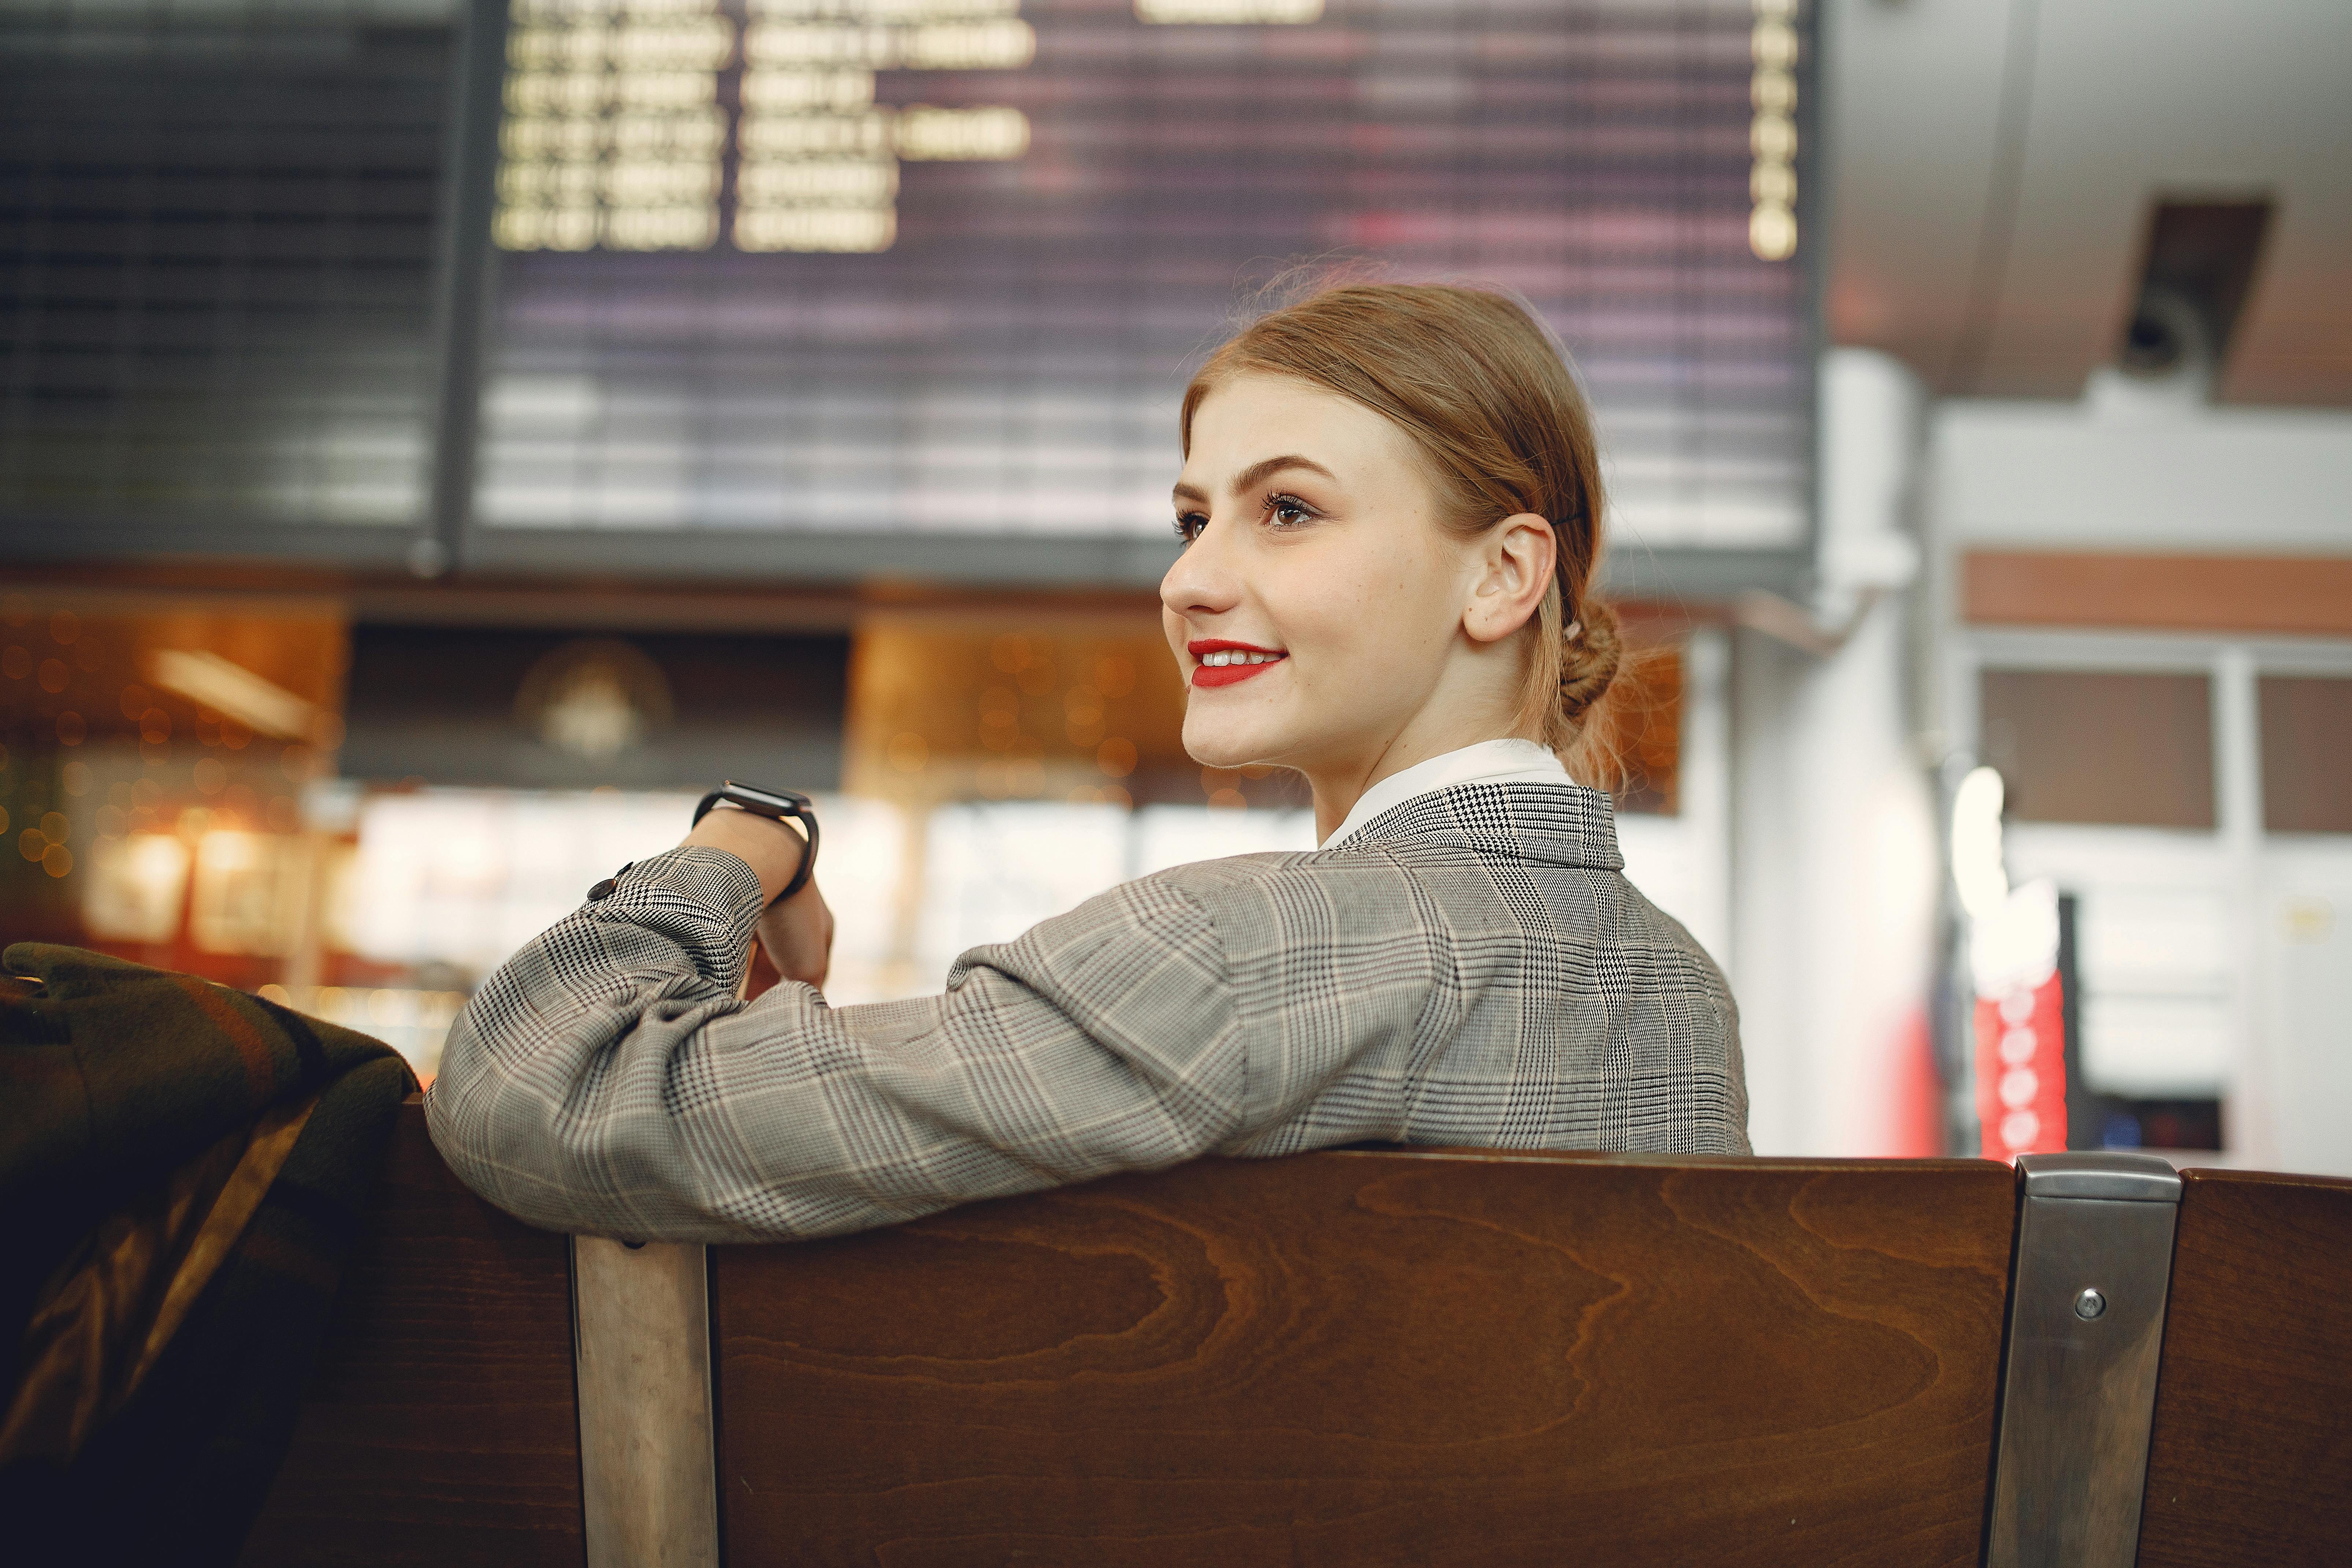 A happy woman seated at the airport | Source: Pexels